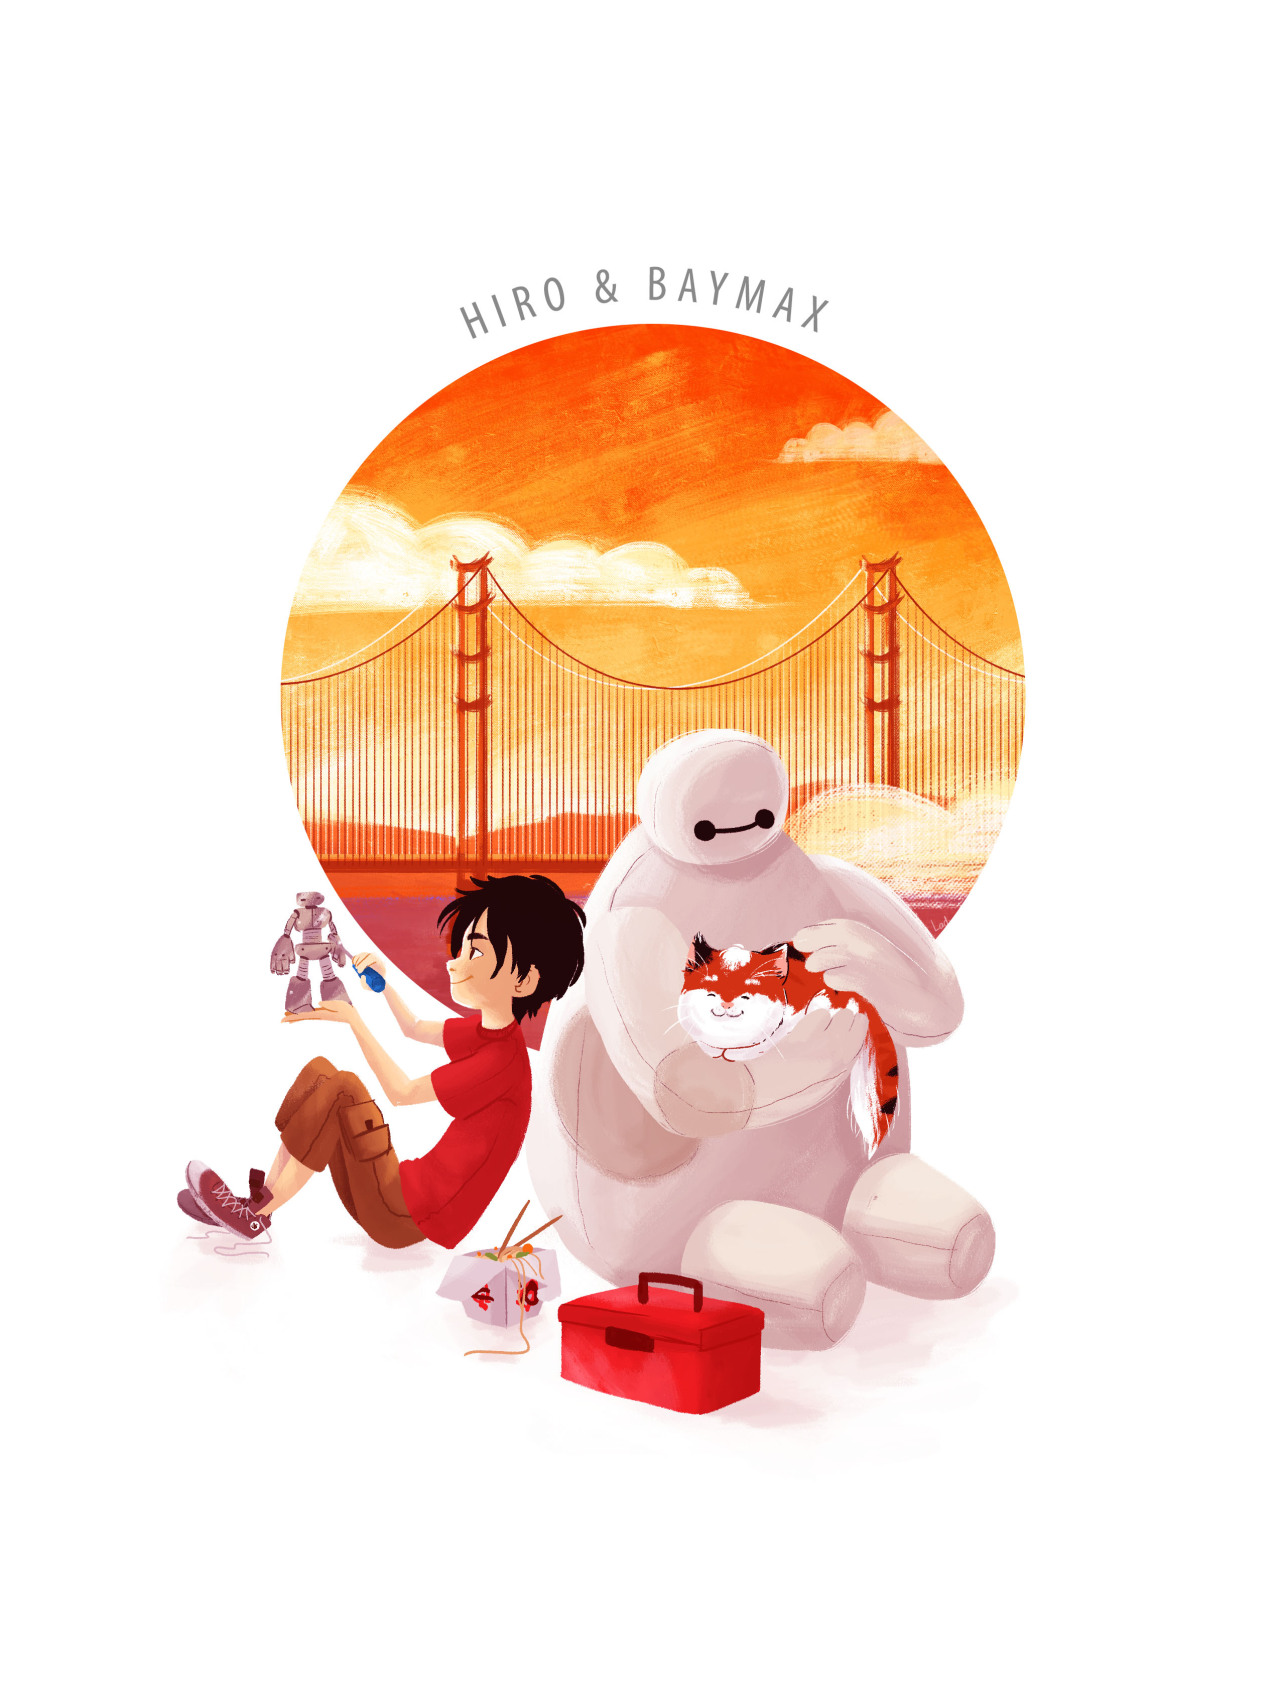 A gift for a friend who loves Big Hero 6.